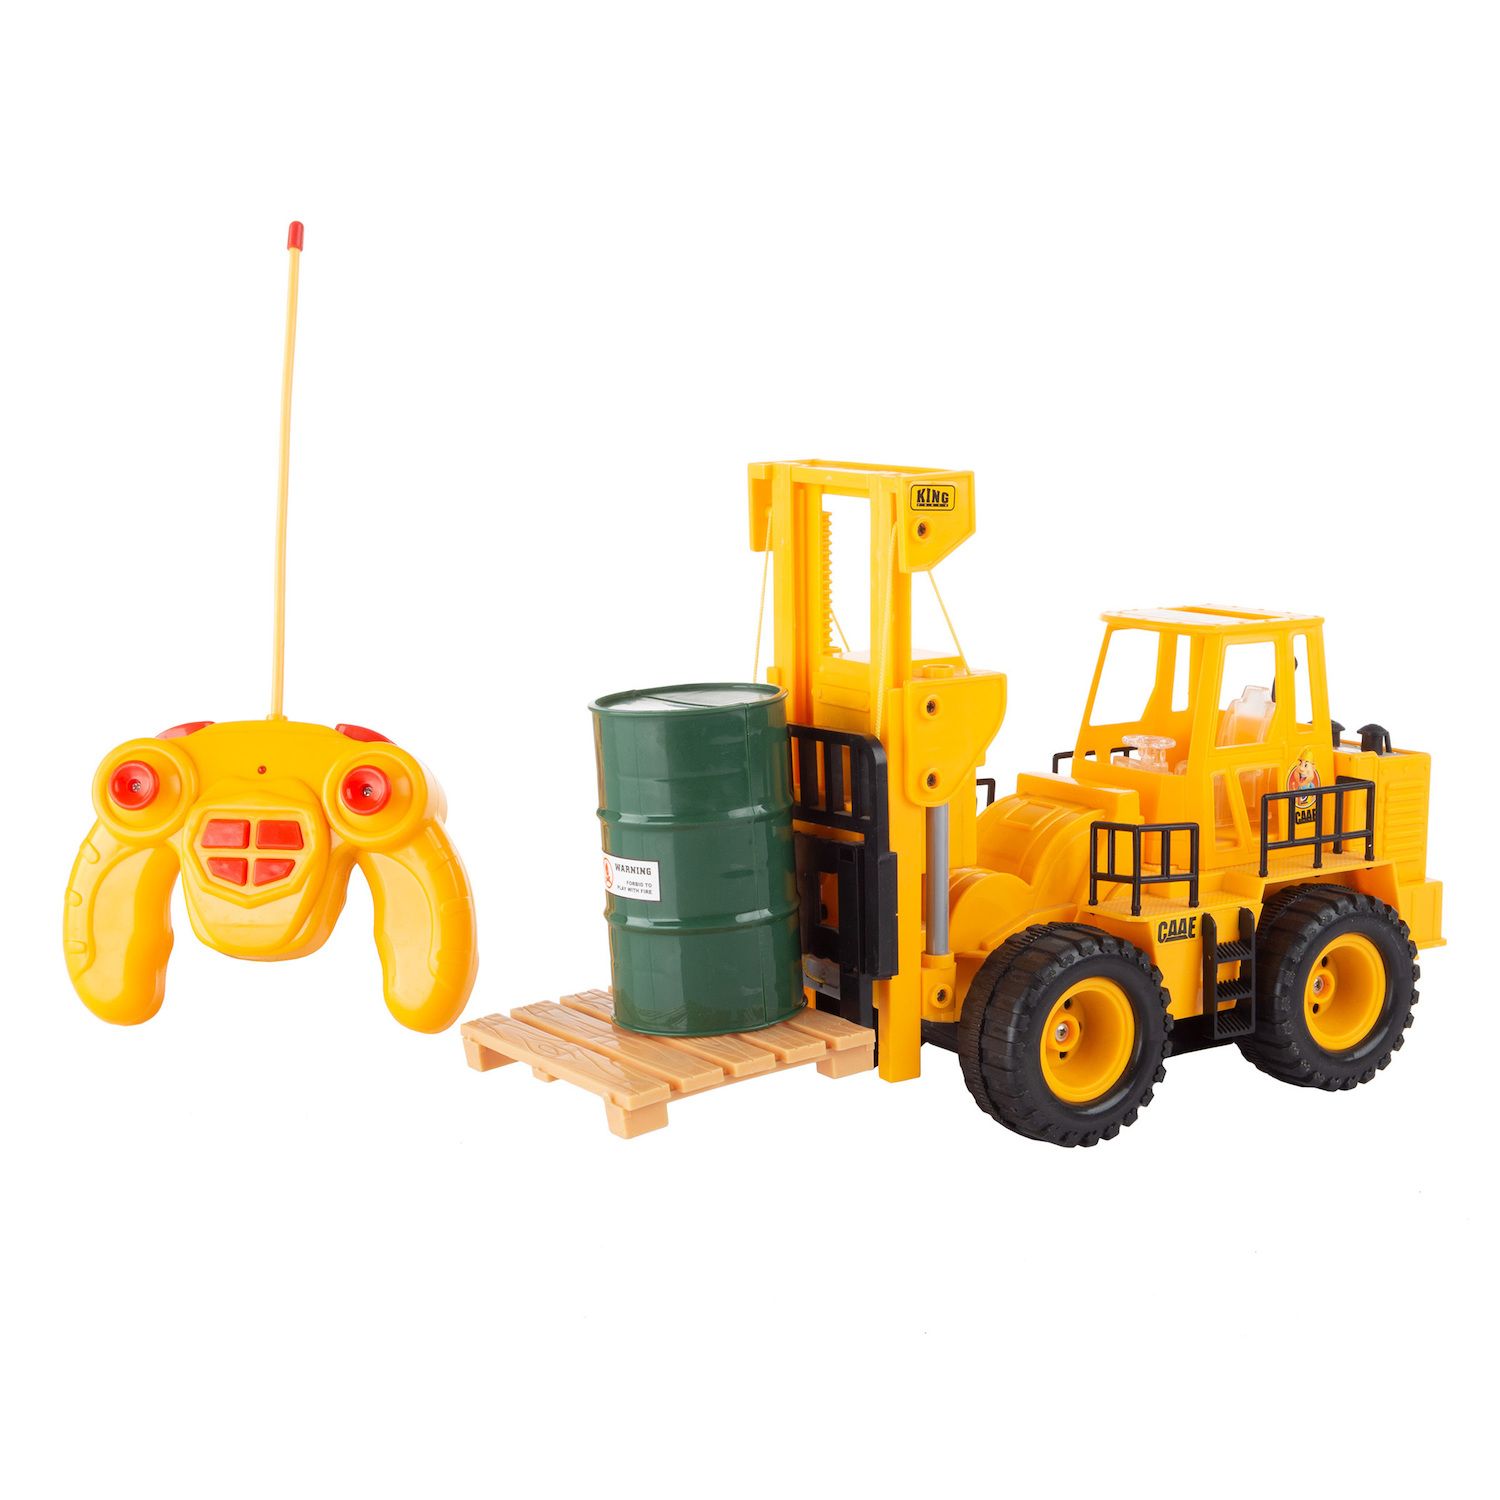 Image for Hey! Play! Remote Control Toy Forklift at Kohl's.